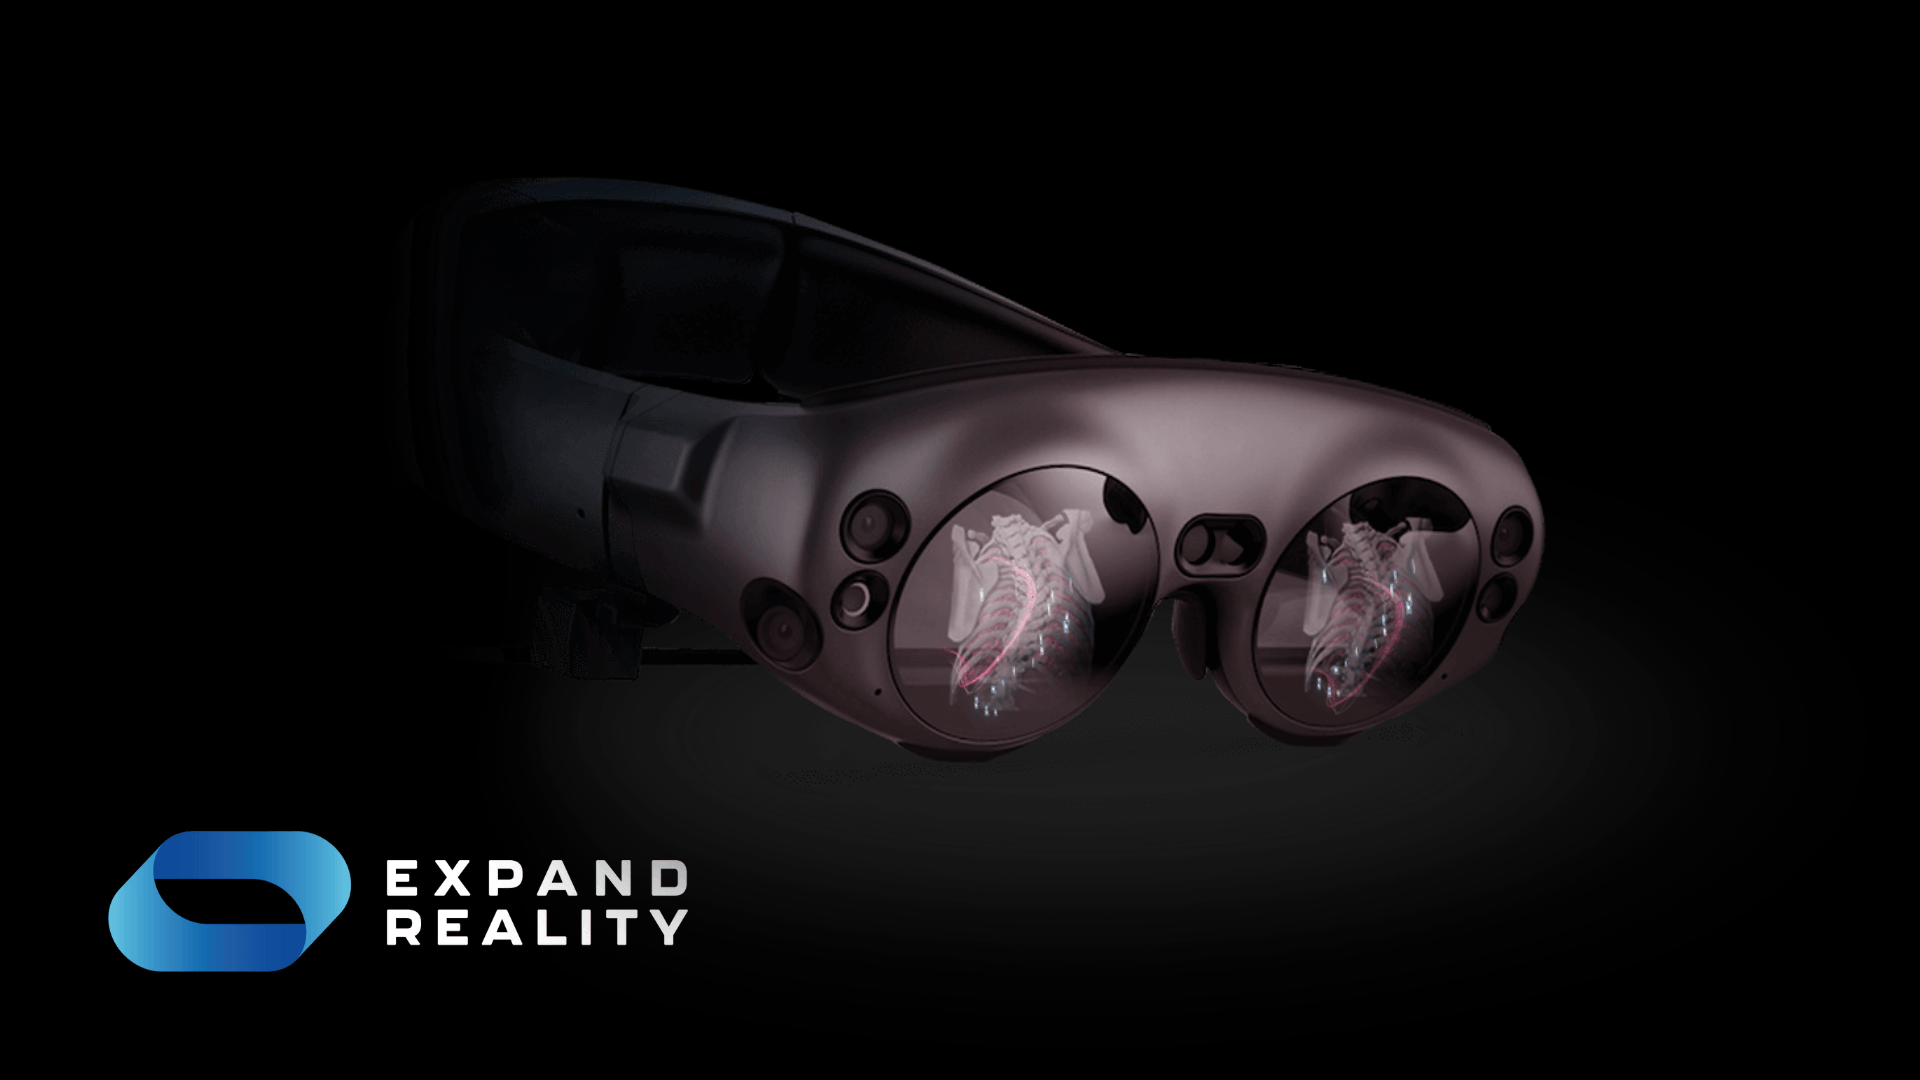 Join us for a deep dive into the forthcoming Magic Leap 2 – an immersive AR headset for business that's at the cutting edge of XR technology.